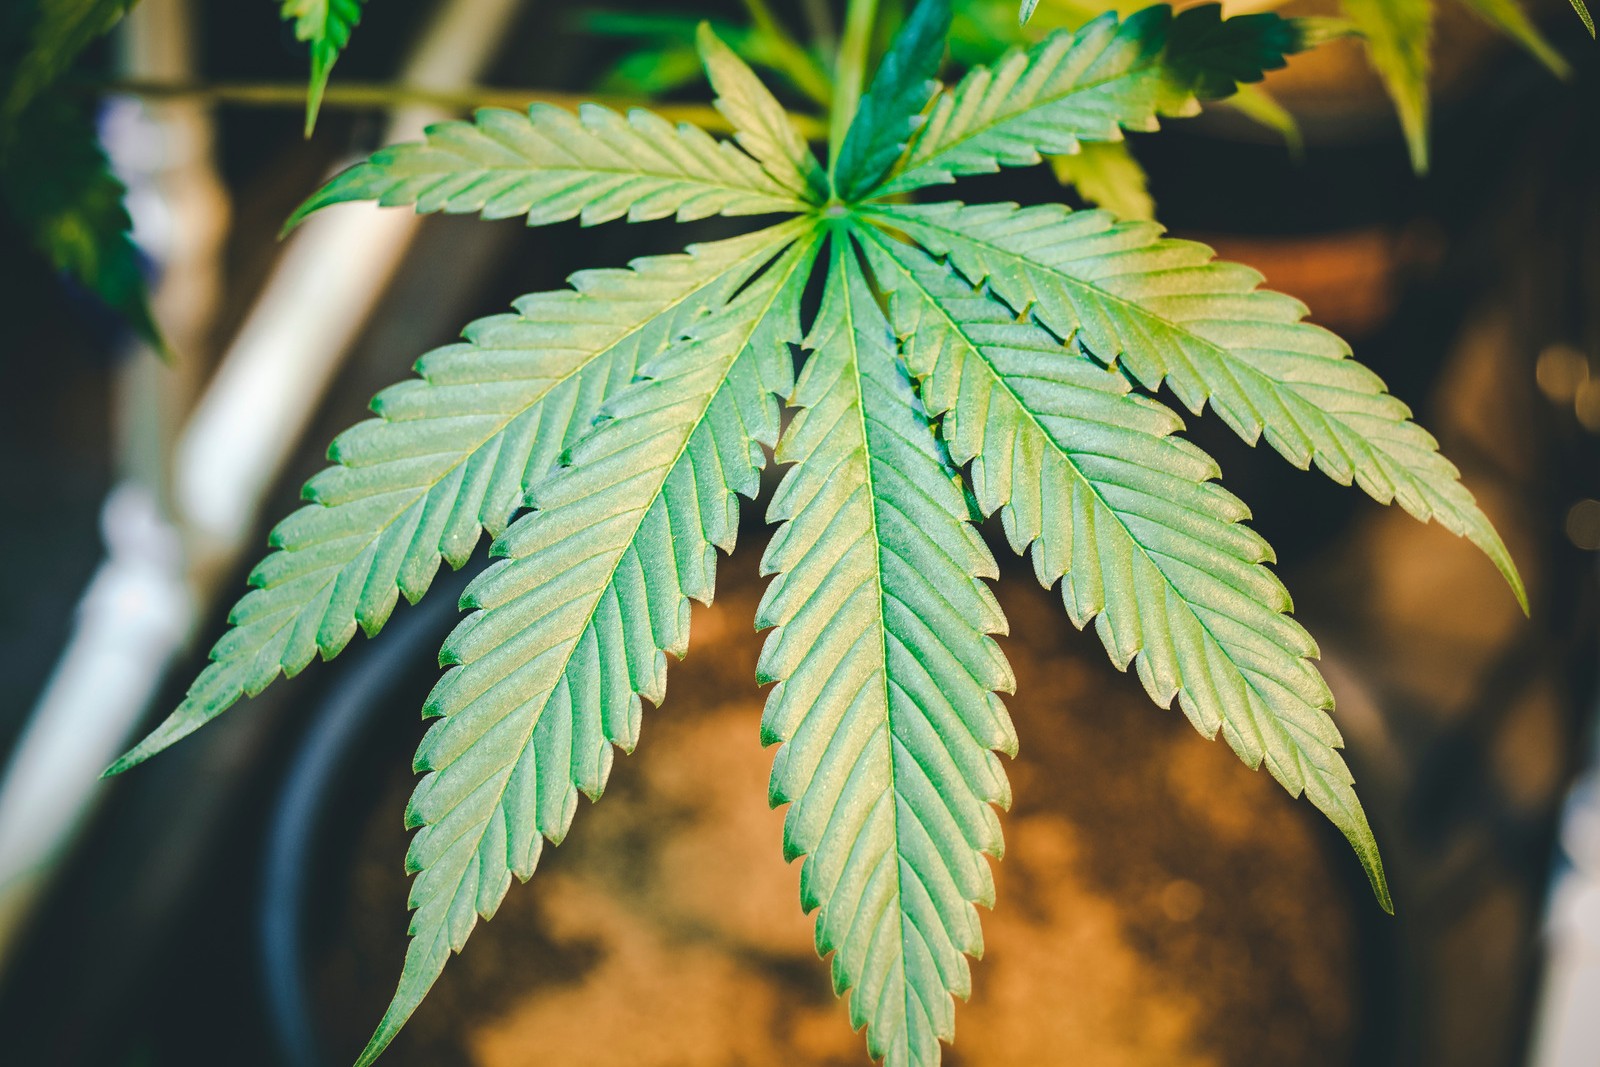 How to Grow Marijuana for Personal Use and Avoid Dispensaries | PotGuide